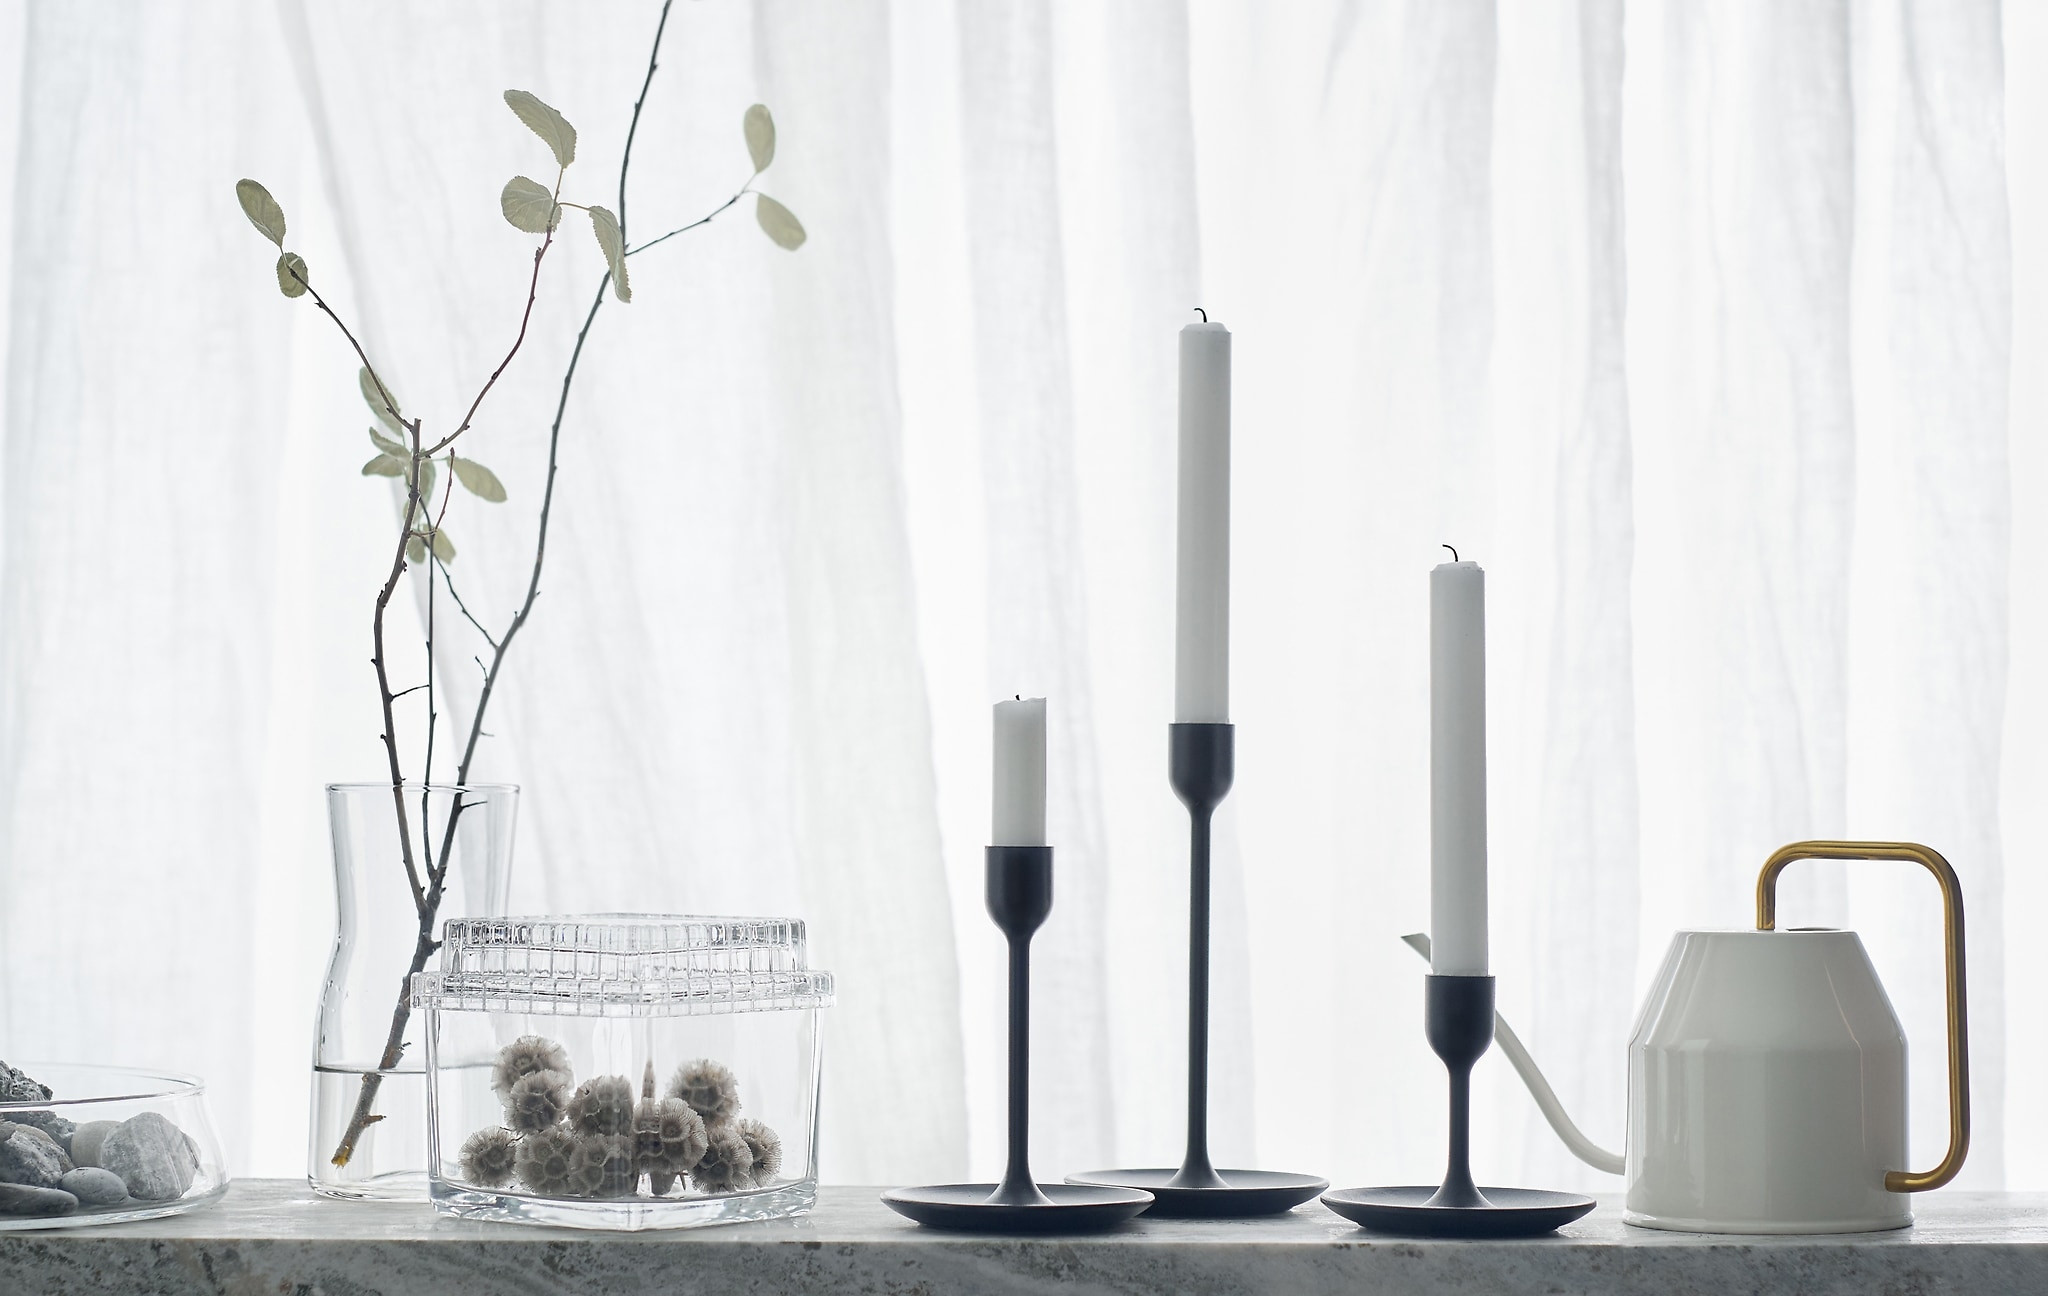 30 Lovely Sea Glass Floor Vase 2024 free download sea glass floor vase of ideas ikea throughout three black candlesticks of different heights on a white backdrop with watering can and glass jars